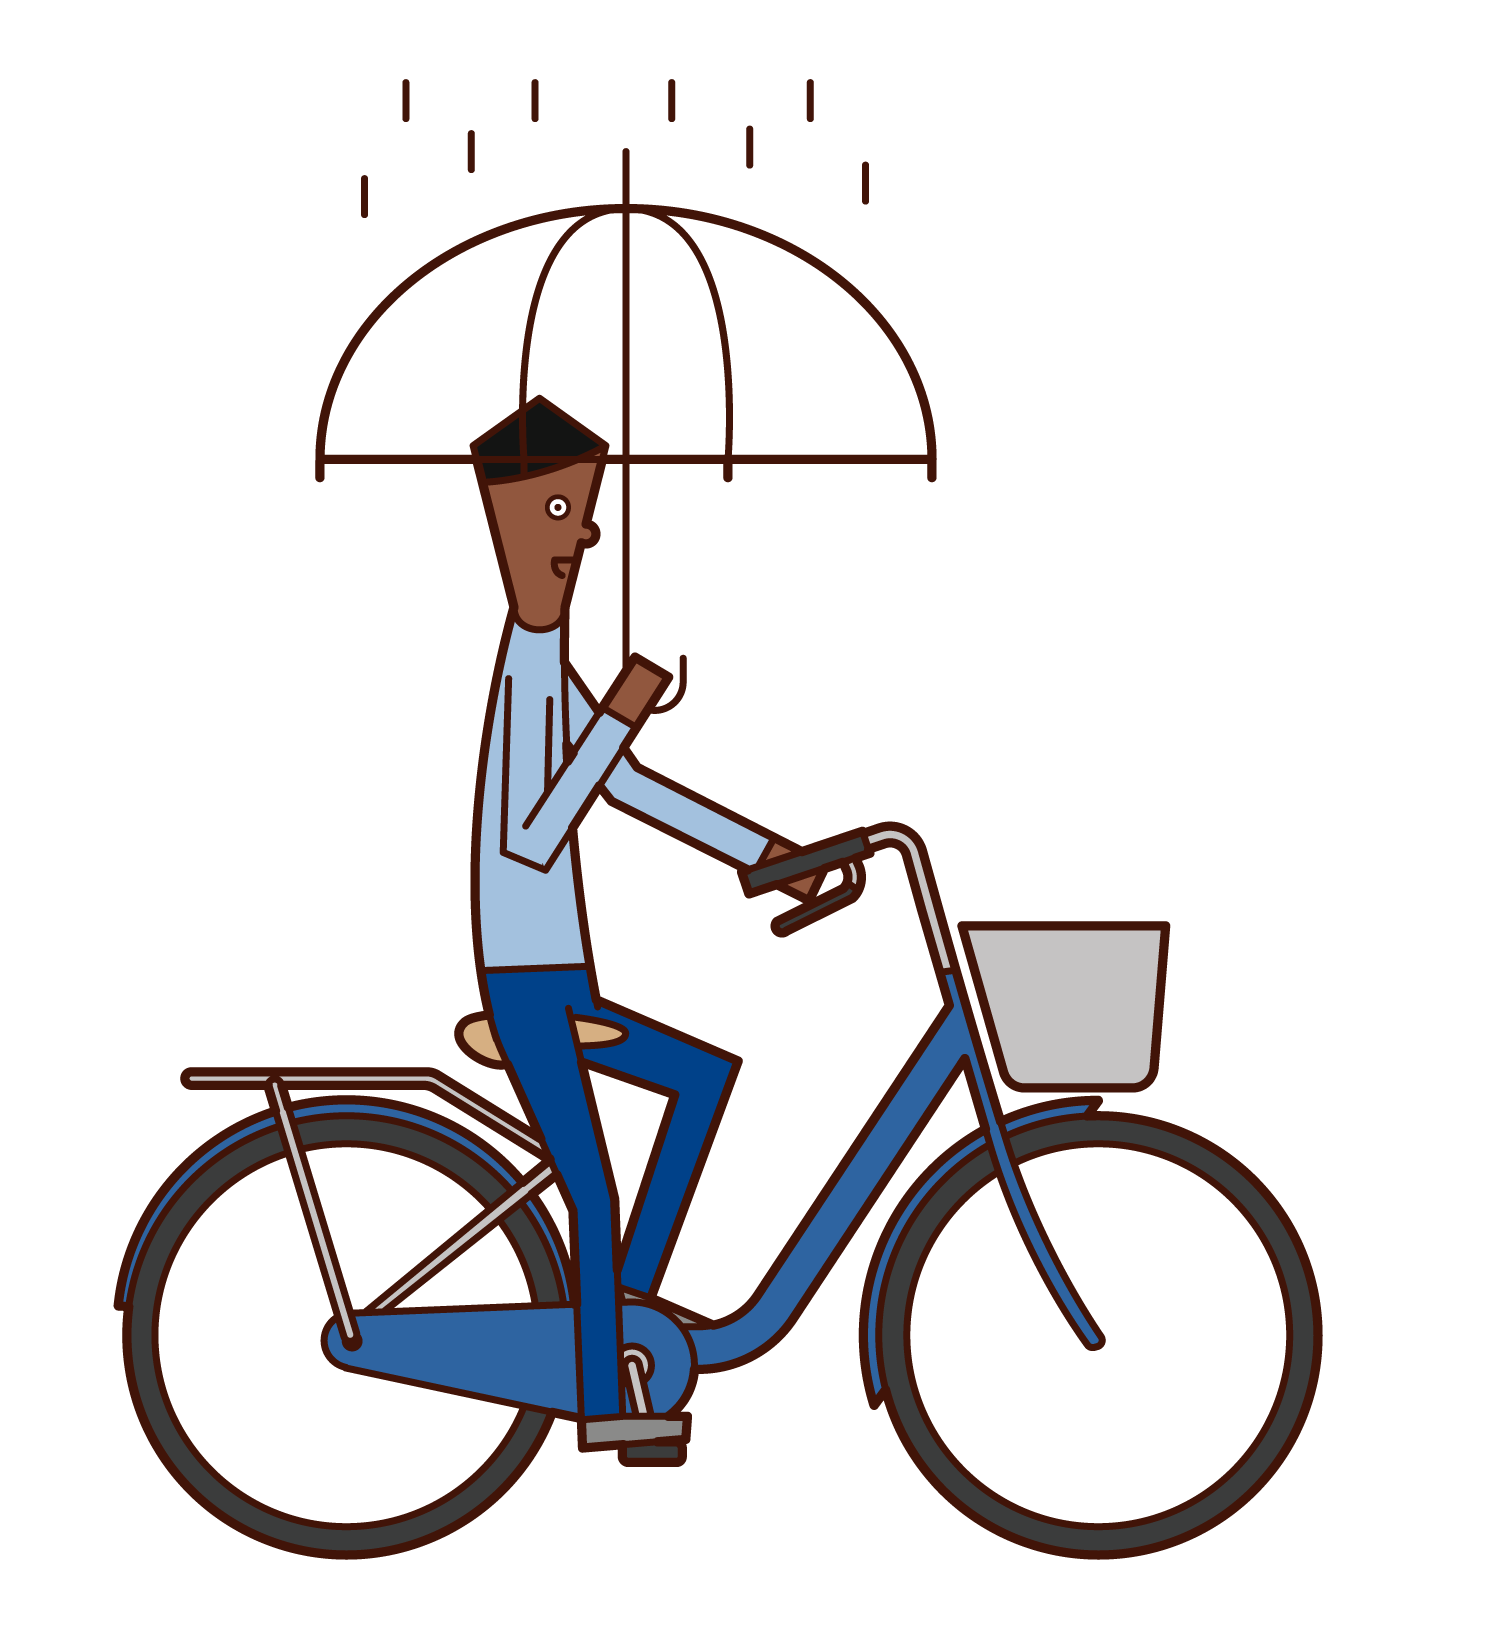 Illustration of a man riding a bicycle with an umbrella